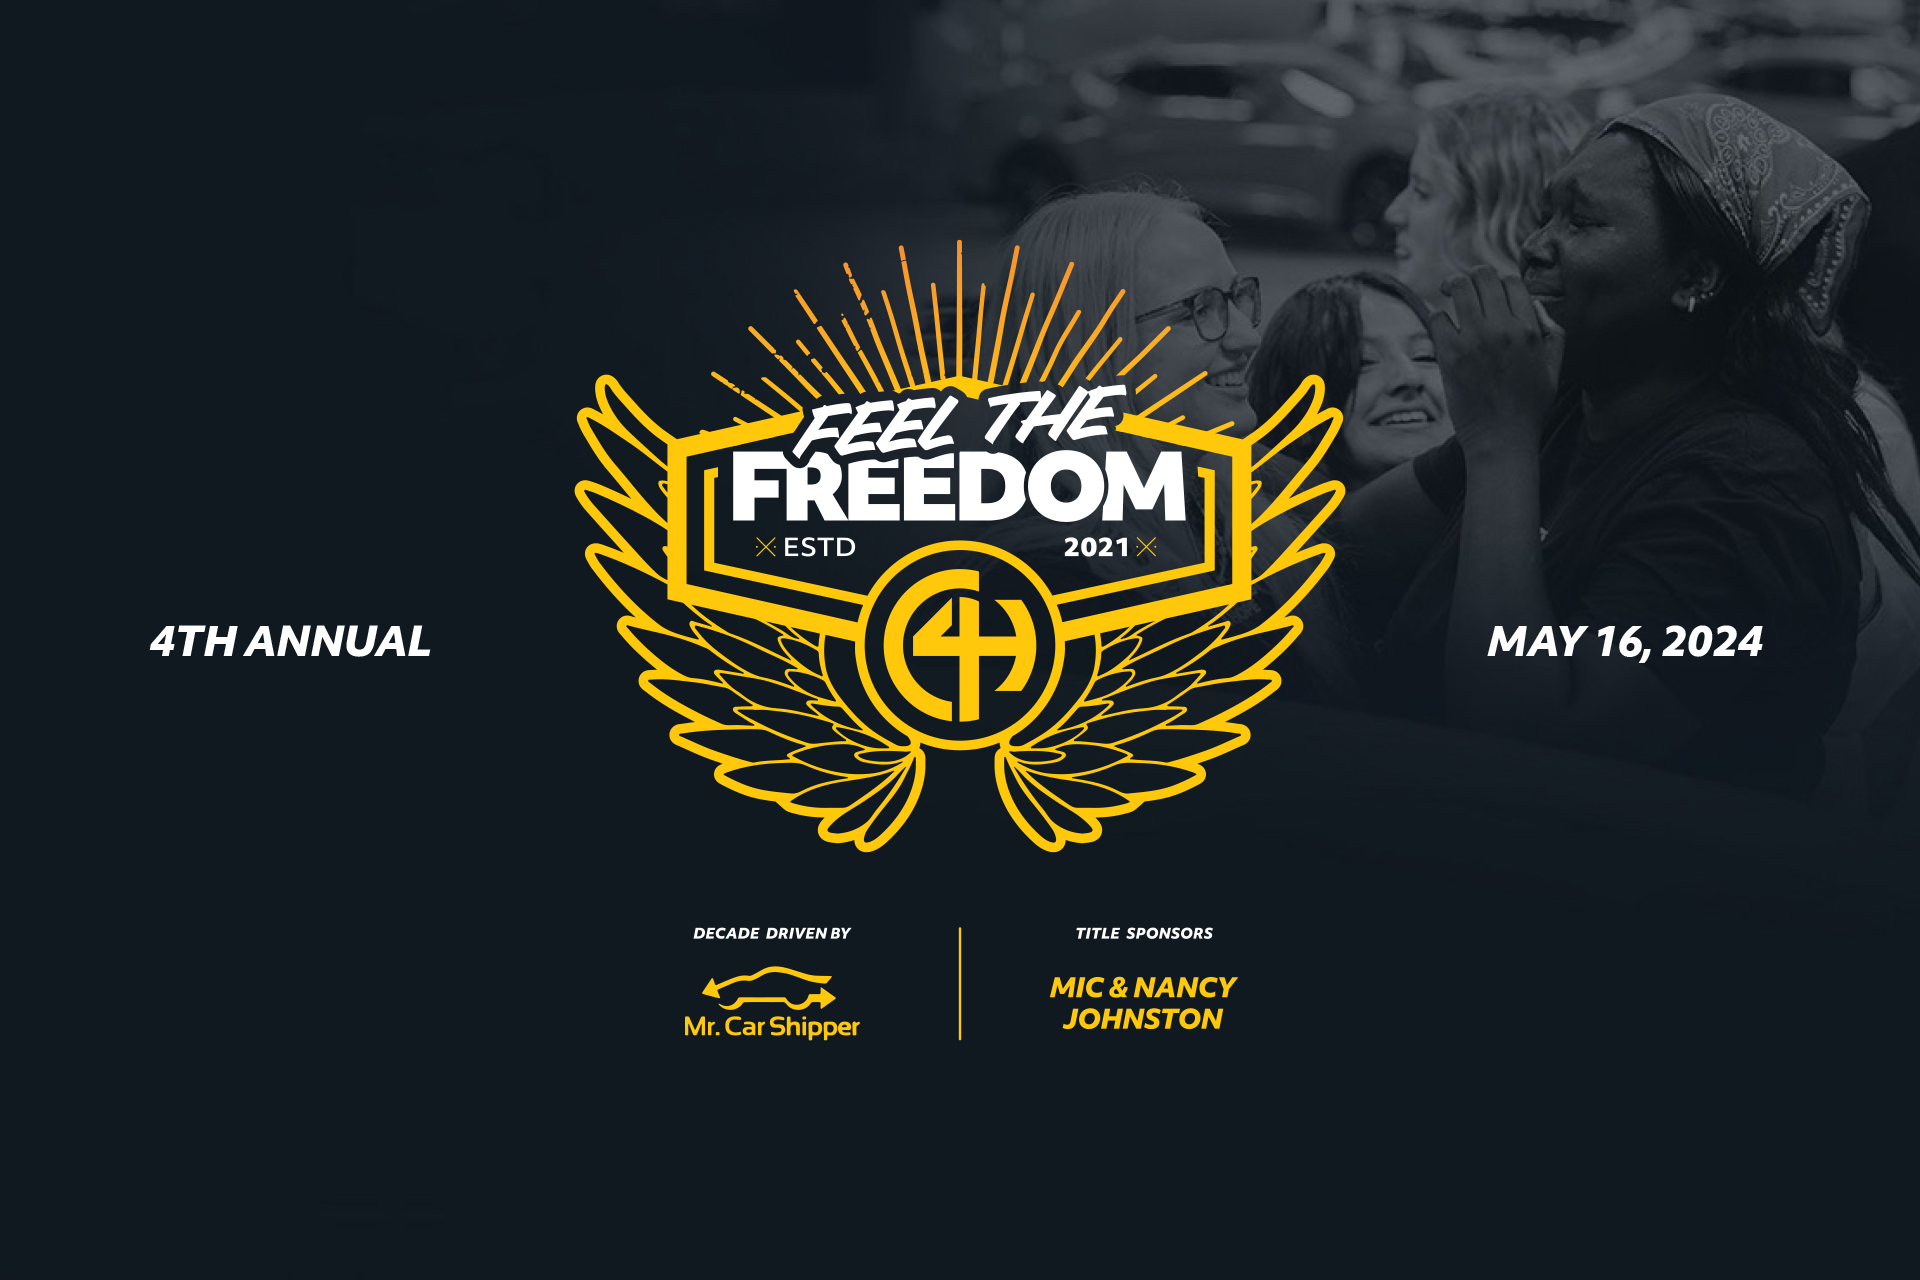 Chariots for Hope – Feel the Freedom Fundraiser